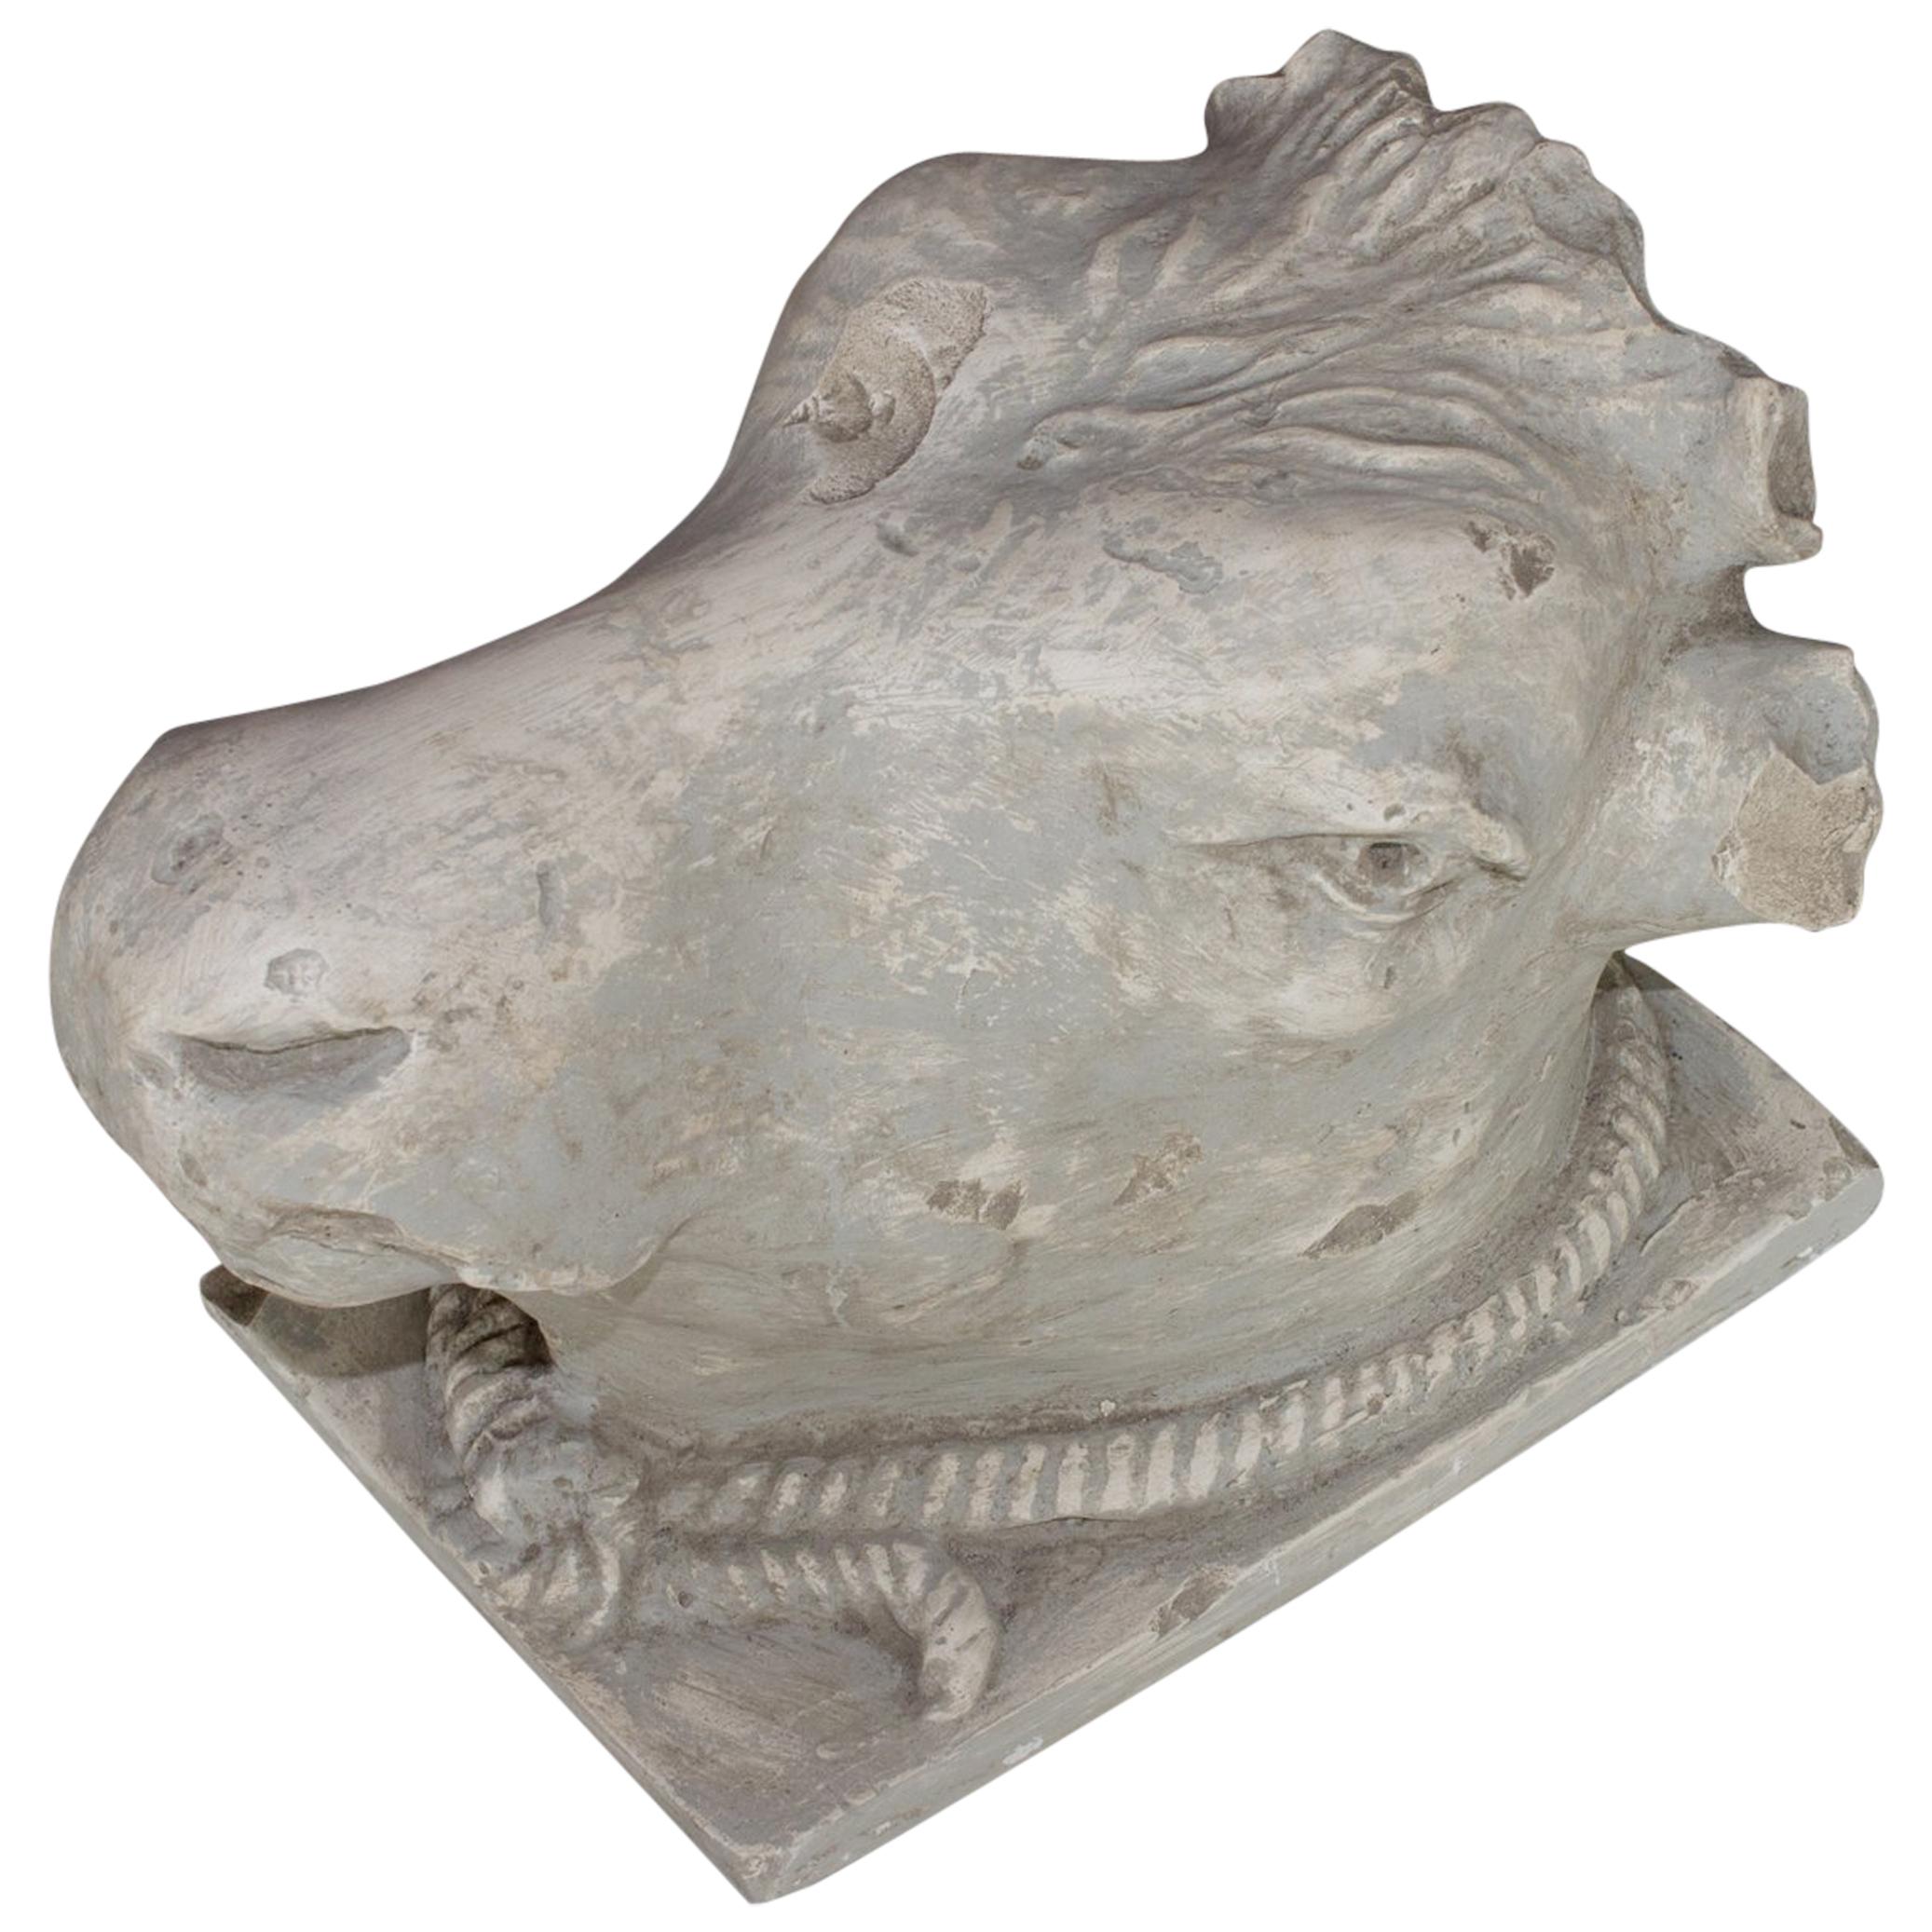 Vintage Plaster Bull’s Head After The Greco or Roman Helenistic Original